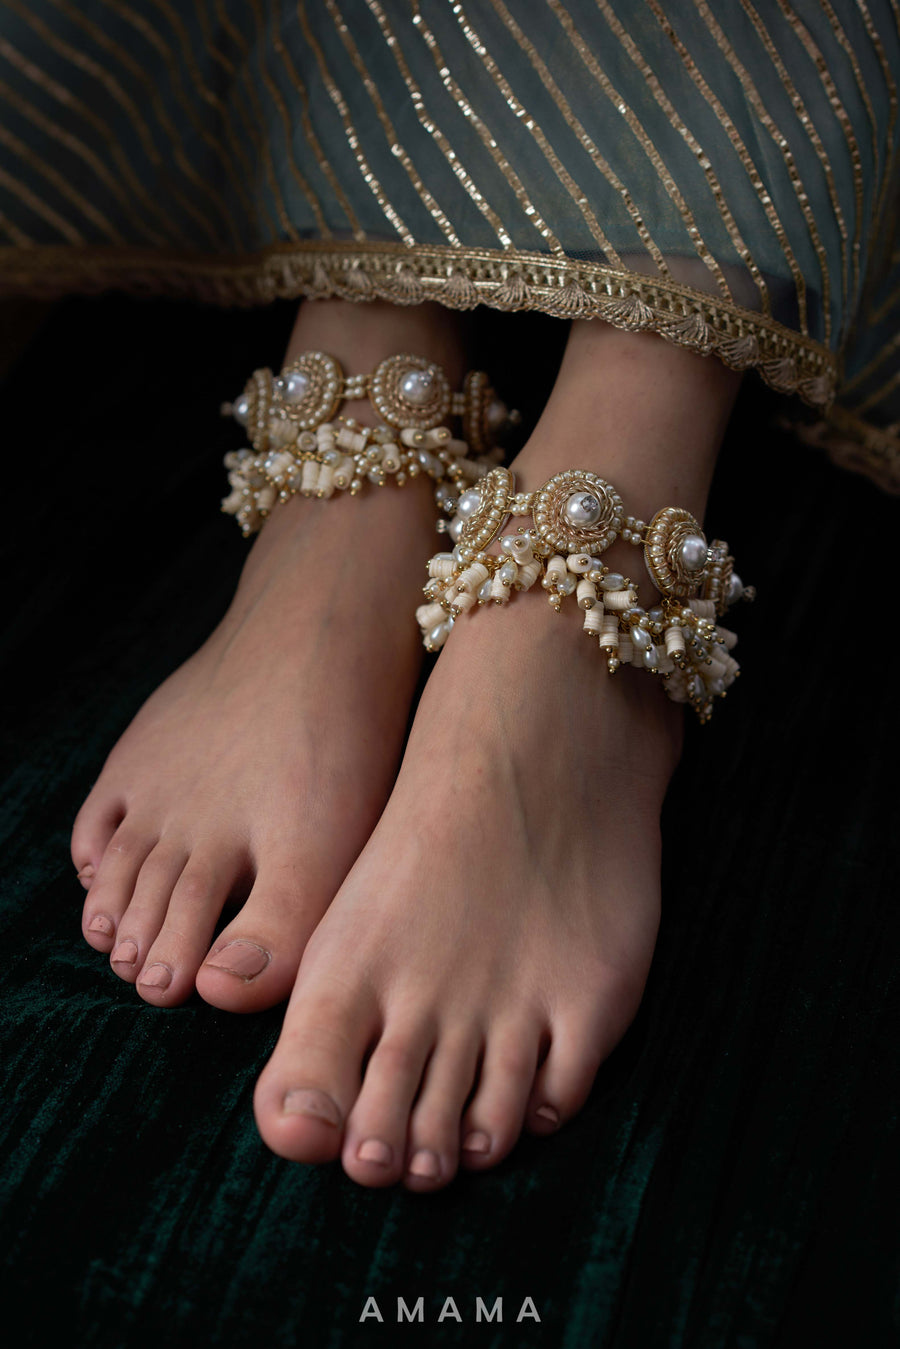 amama anklets